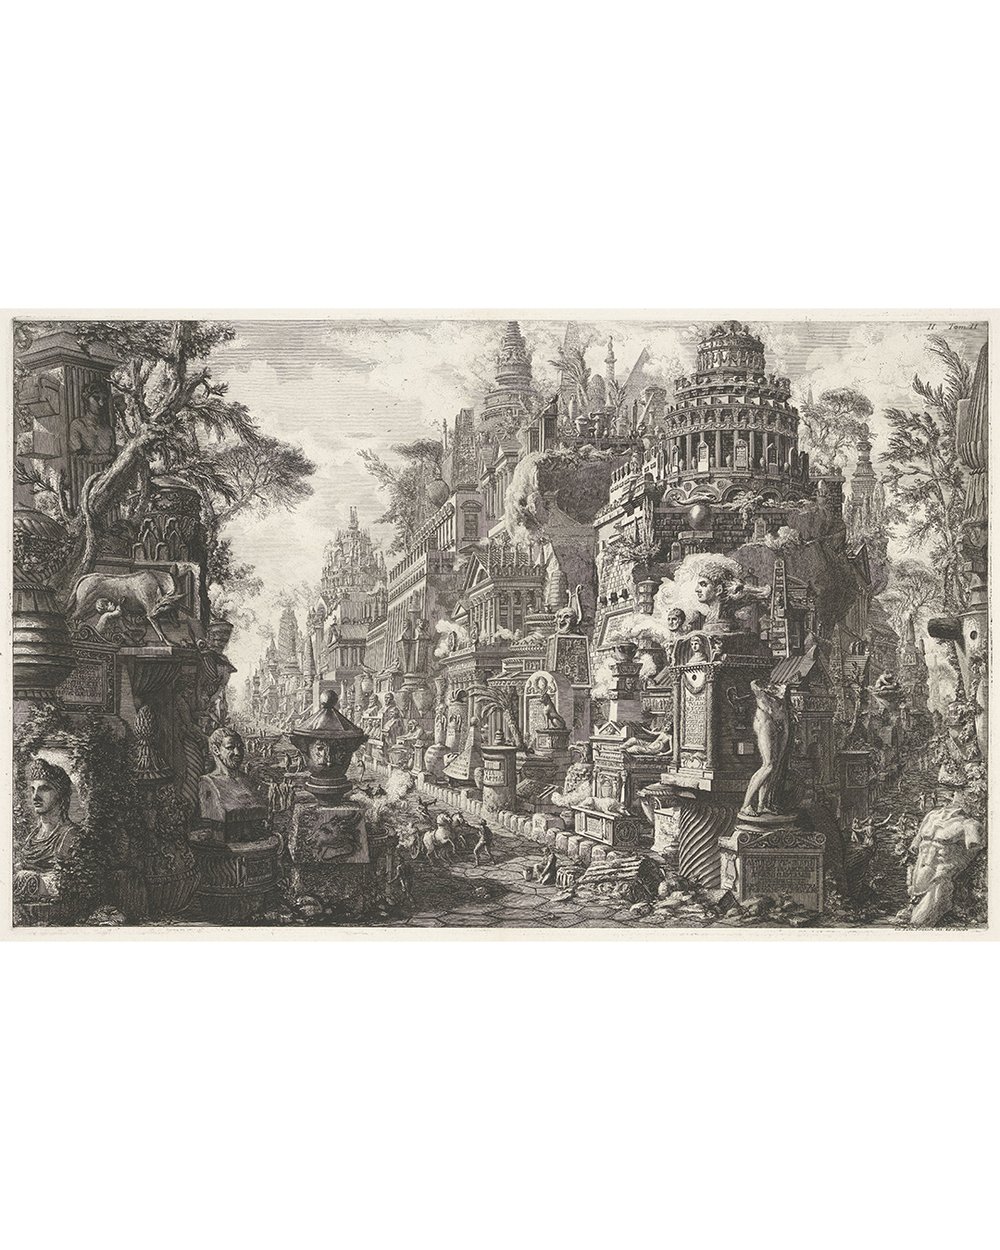 ''Frontispiece with a fantasy depiction of the Via Appia Antica'' (1756 - 1757)